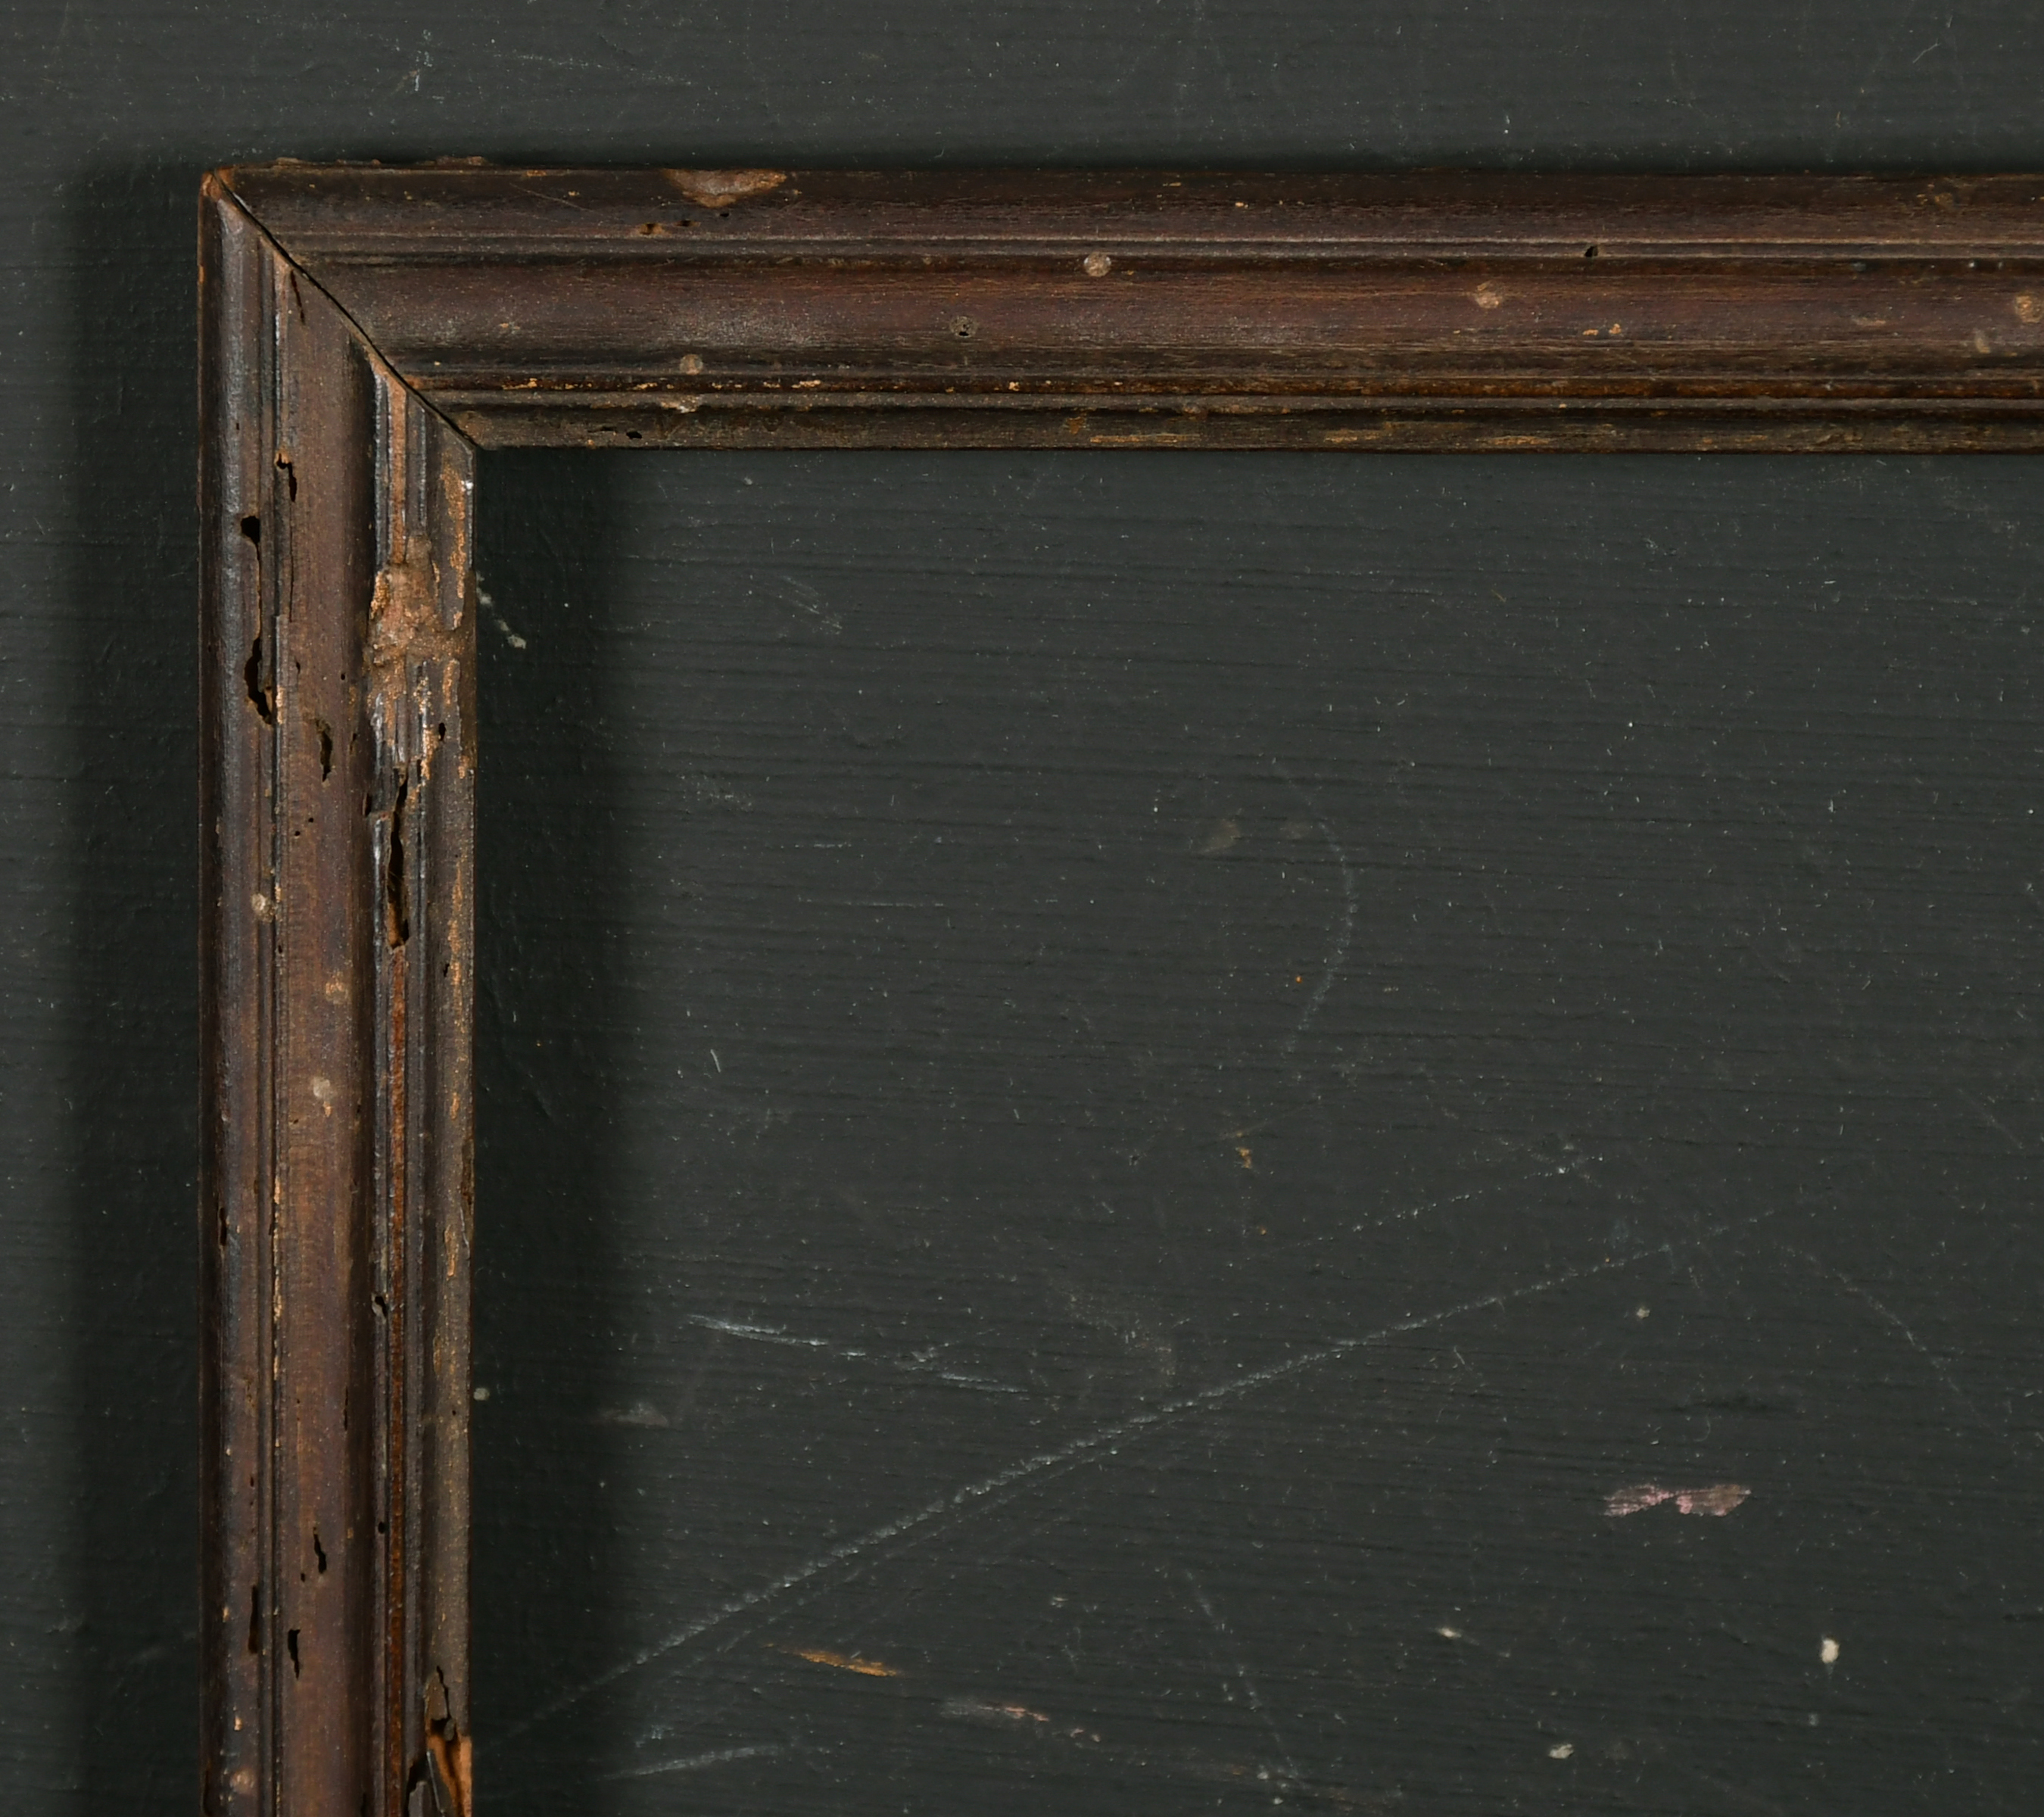 18th Century English School. Darkwood Frame, rebate 8" x 6.25" (20.3 x 15.9cm) and another